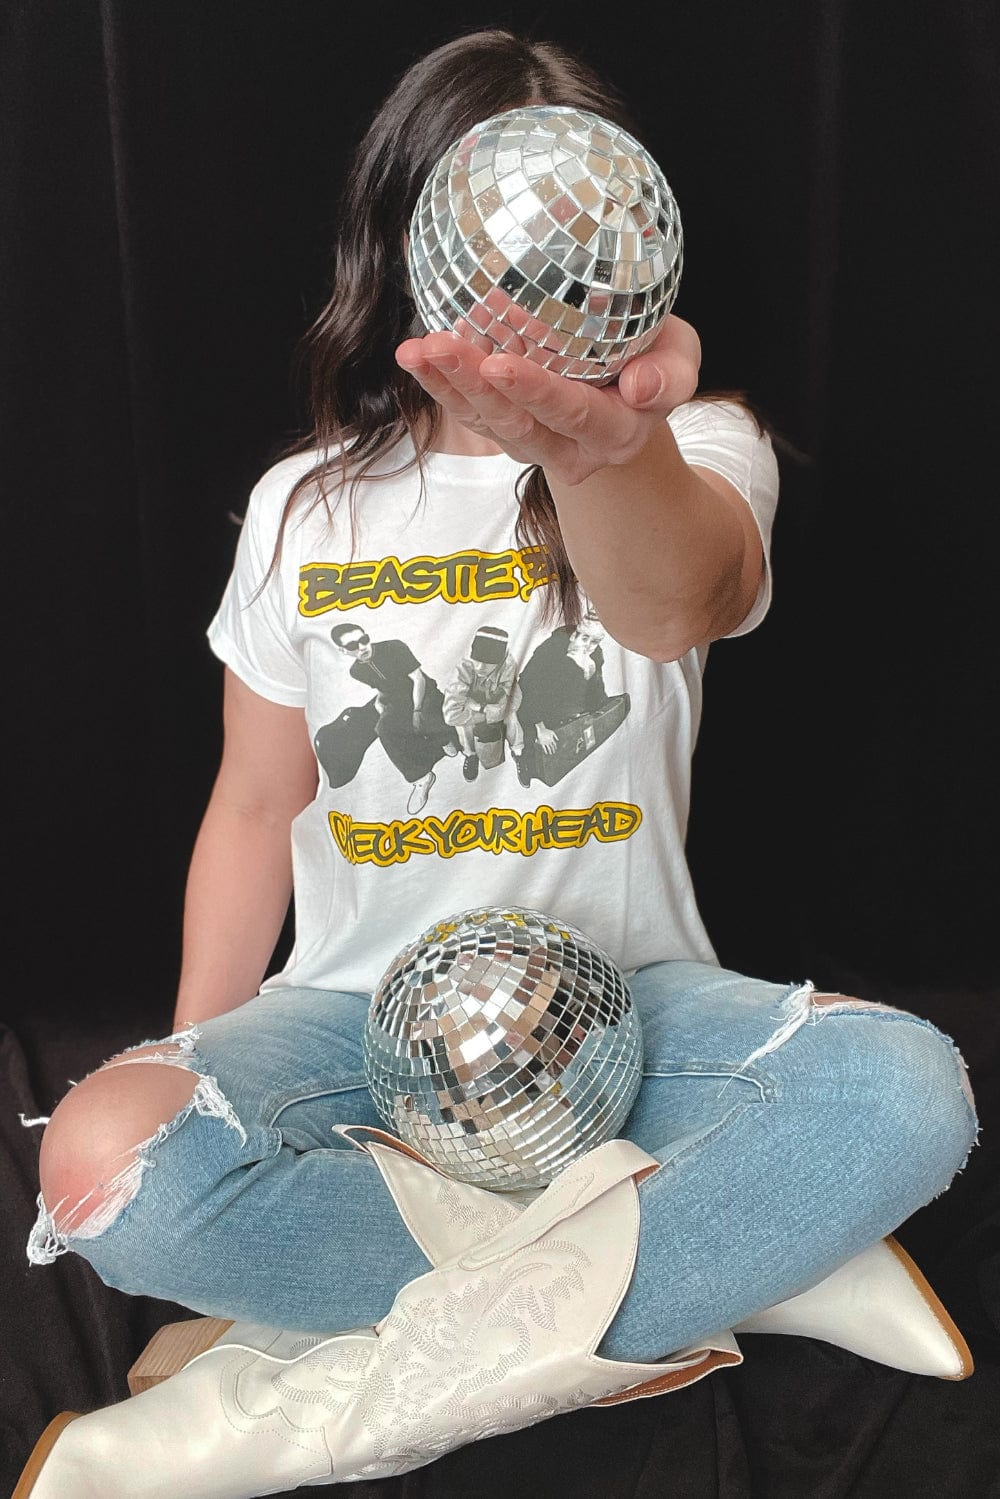 DAYDREAMER Beastie Boys Check Your Head Solo Tee in Vintage White - Graphic Tee - Blooming Daily